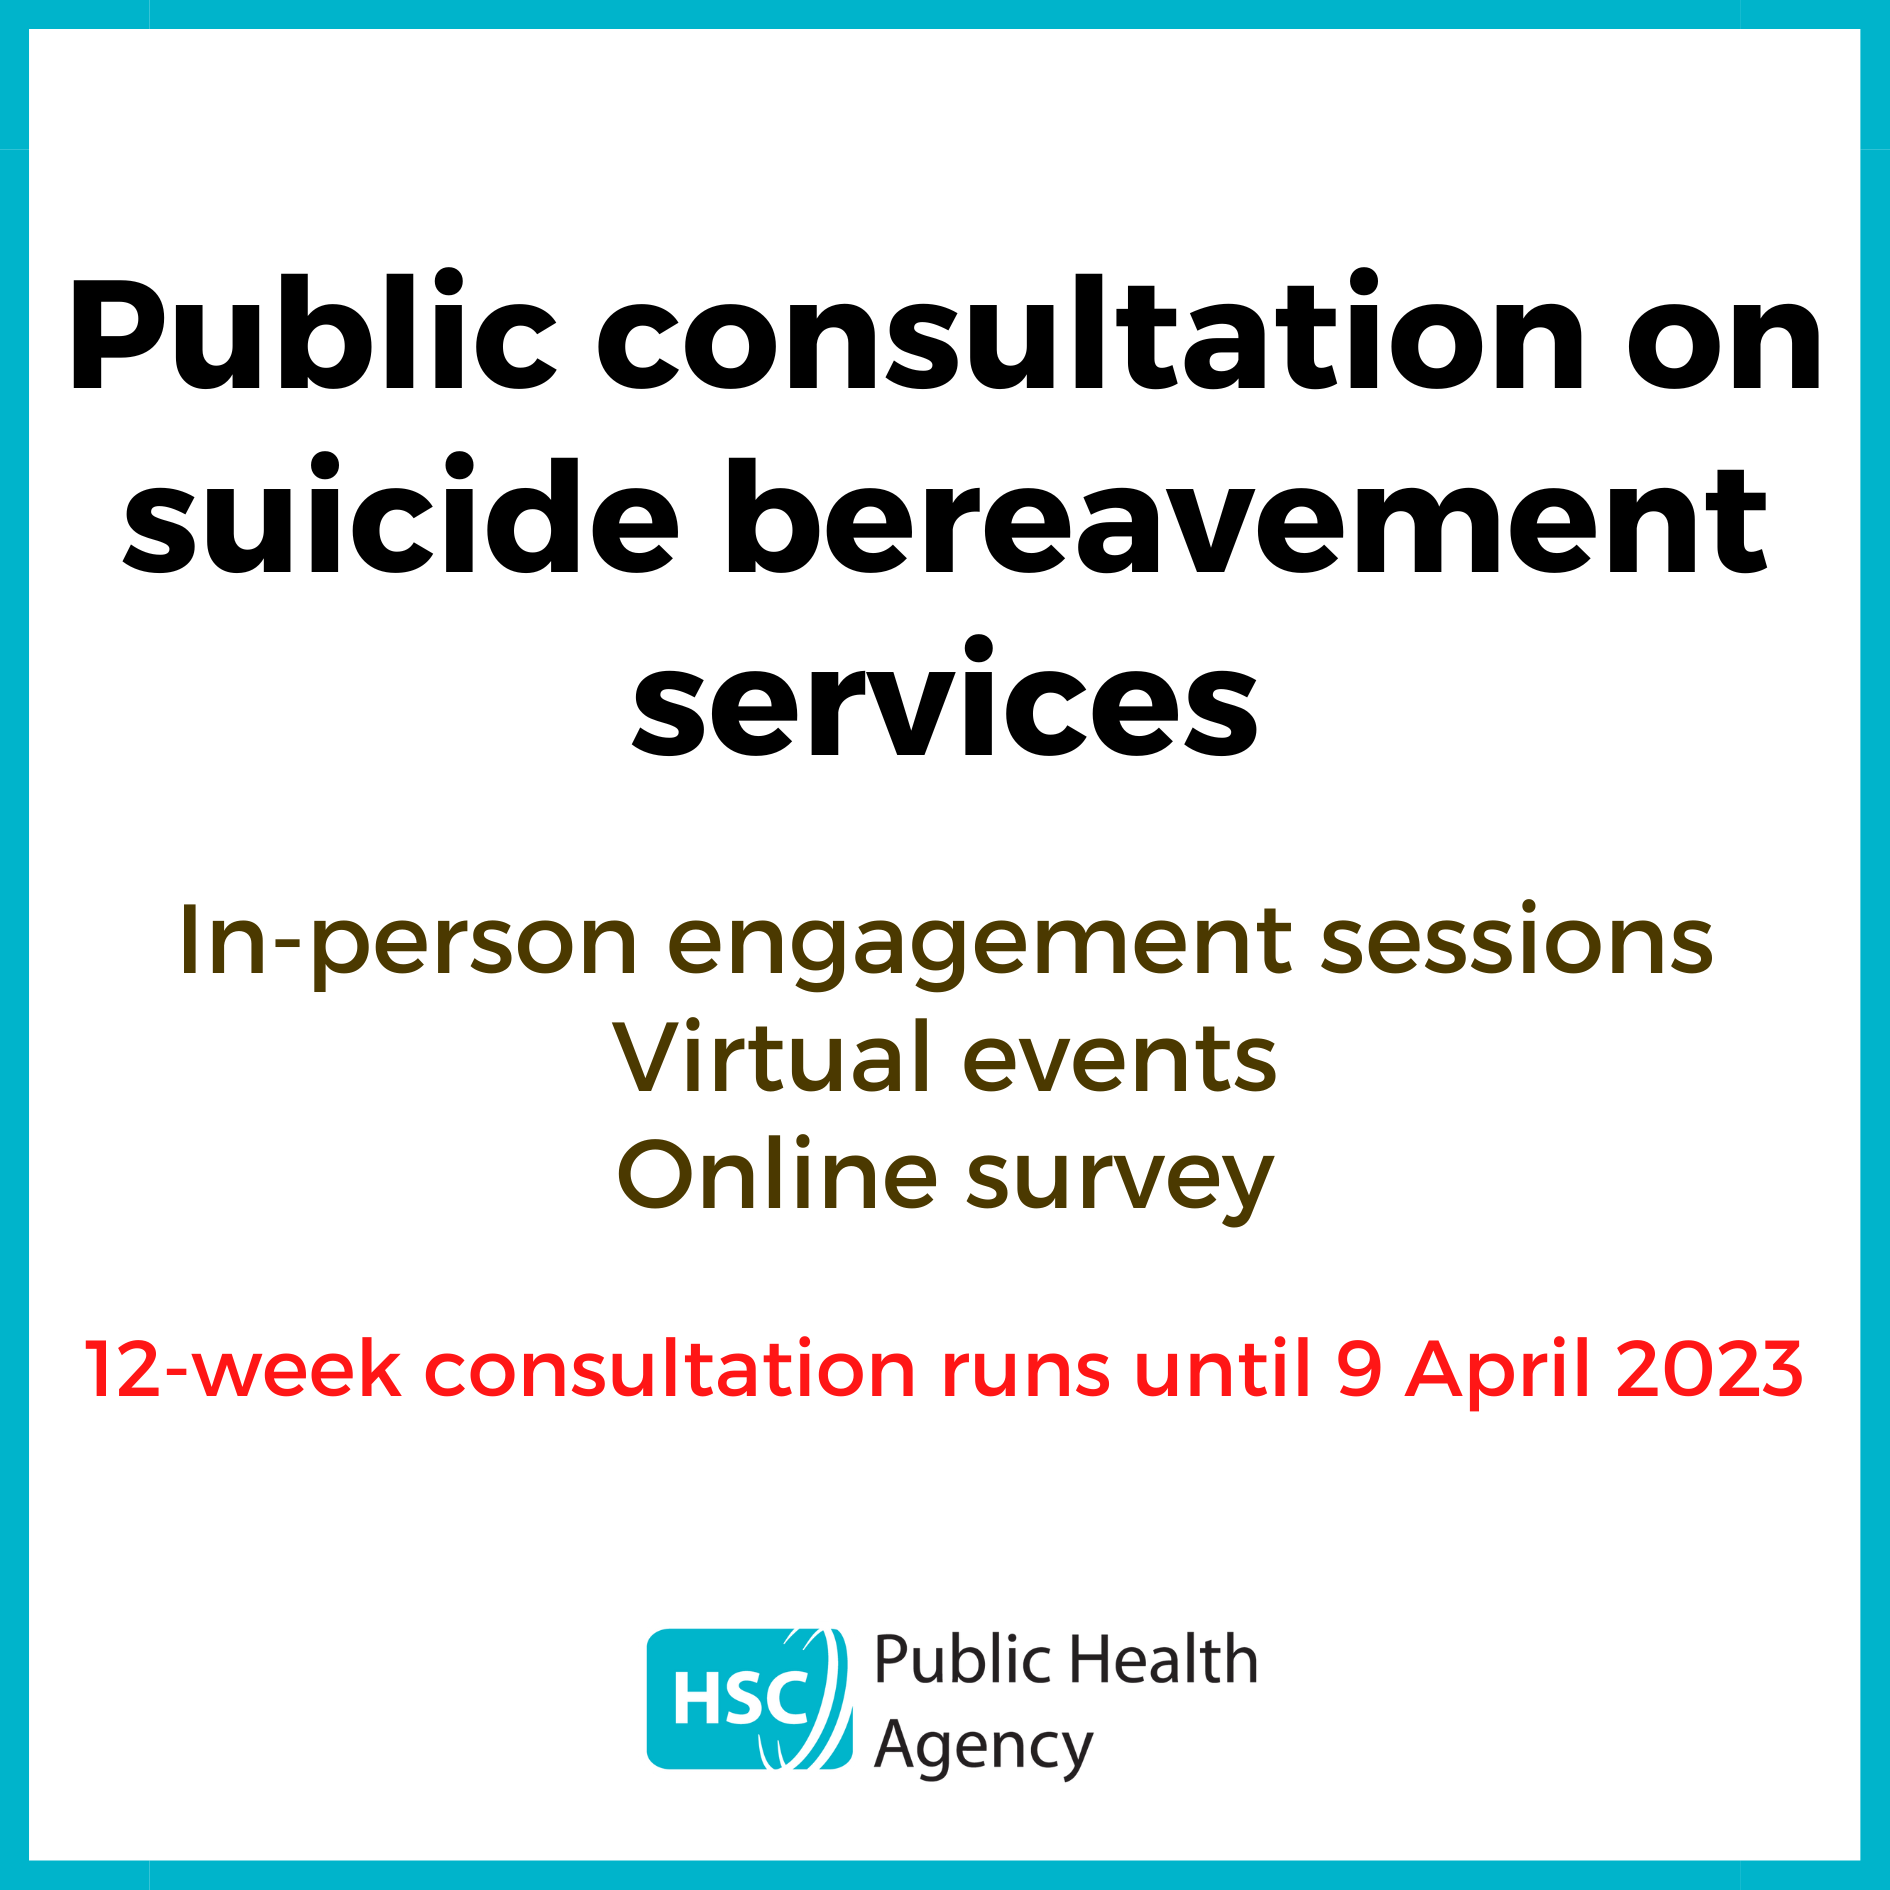 Graphic with a light blue border showing test which says: “Public consultation on suicide bereavement services. In-person engagement sessions. Virtual events. Online survey. 12-week consultation runs until 9 April 2023.” The PHA logos is at the bottom of the graphic.